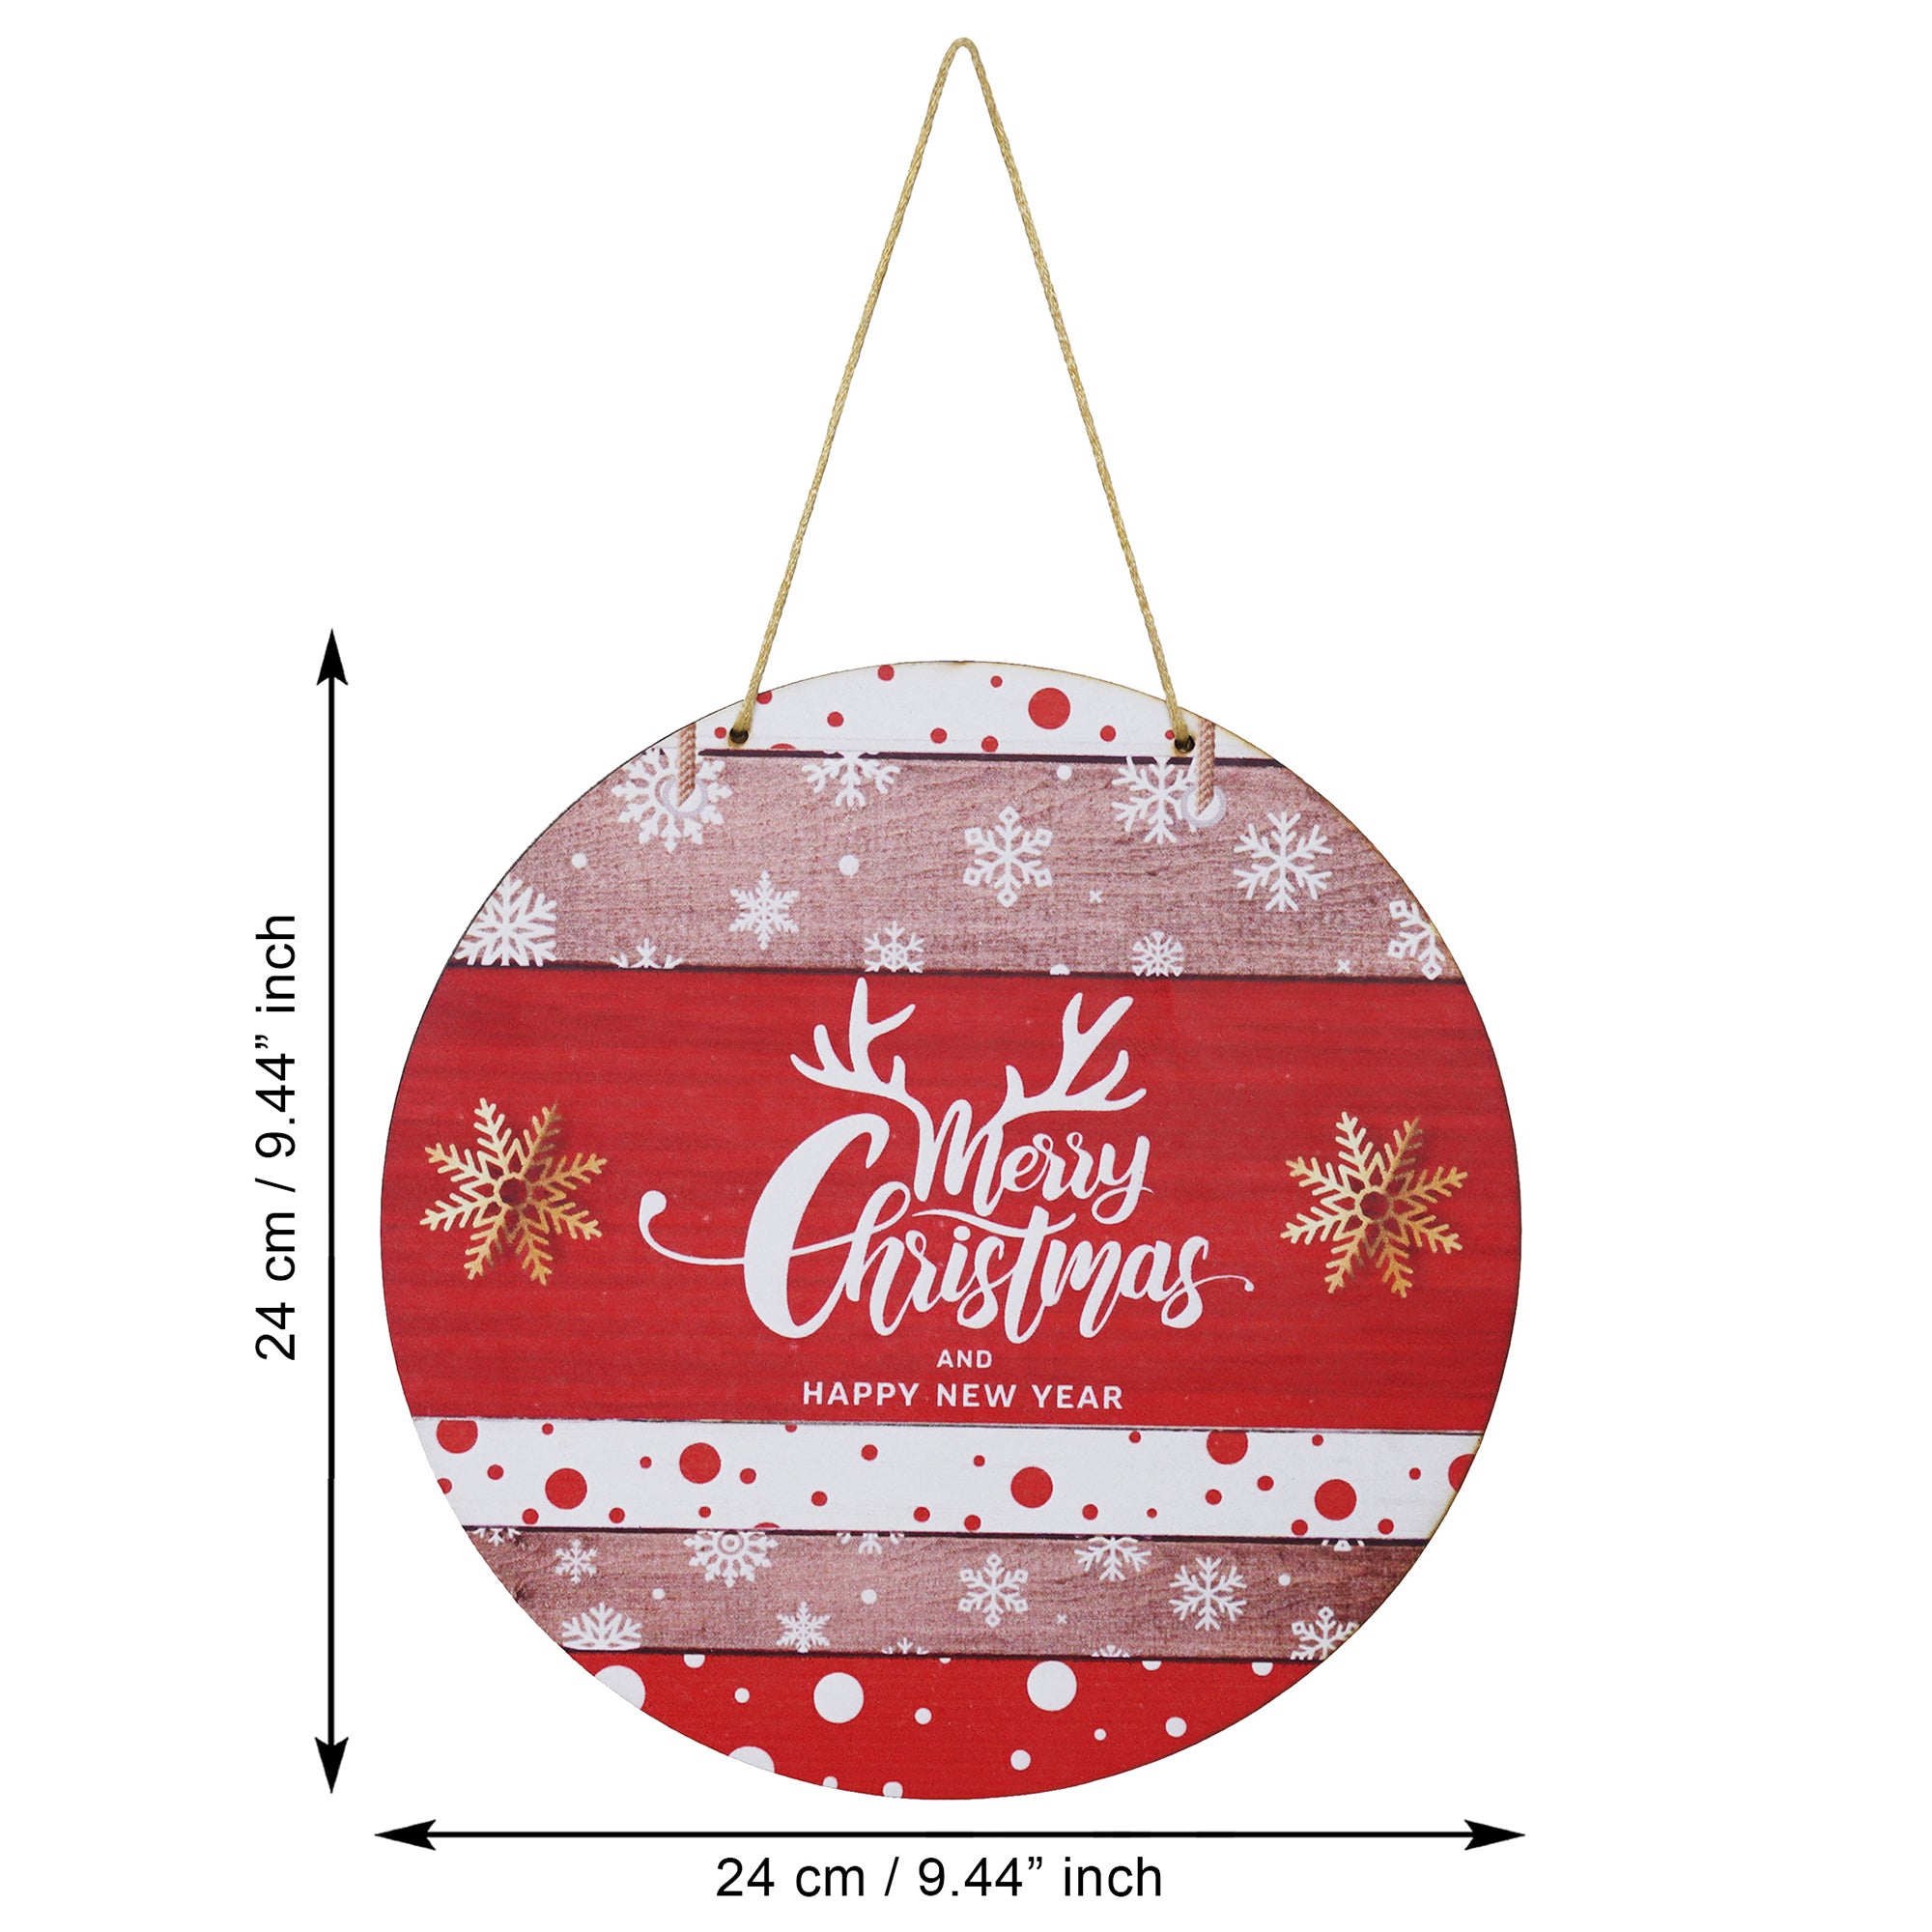 eCraftIndia "Merry Christmas and Happy New Year" Printed Wooden Door Wall Hanging for Home and Christmas Tree Decorations (Red, White, Golden) 3